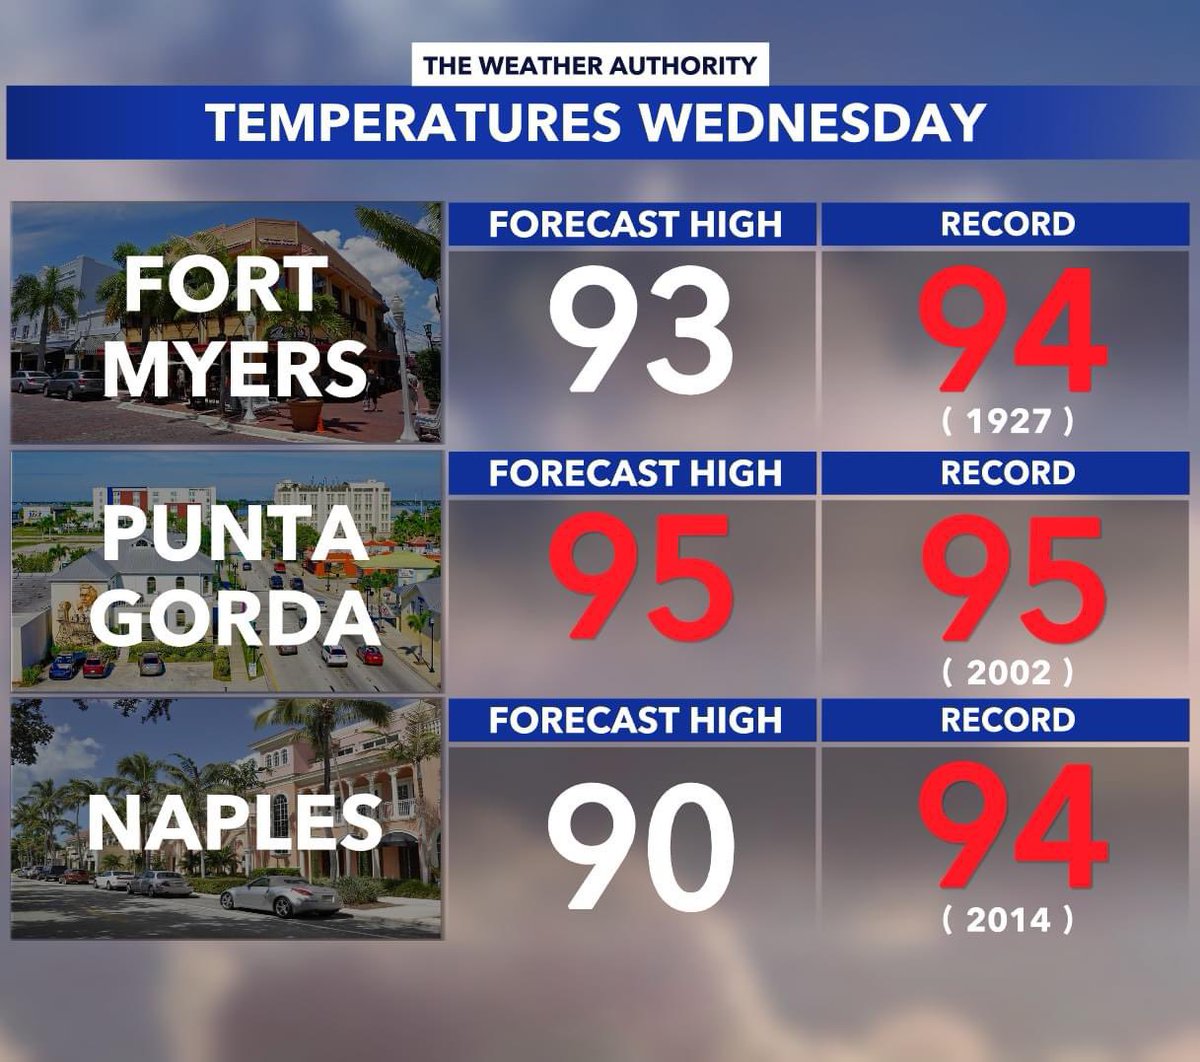 RECORD HEAT POSSIBLE WEDNESDAY 5/8

The heat is ON in SWFL with temperatures topping out in the low-to-mid 90s tomorrow! 🔥
#flwx #swfl #florida #recordheat